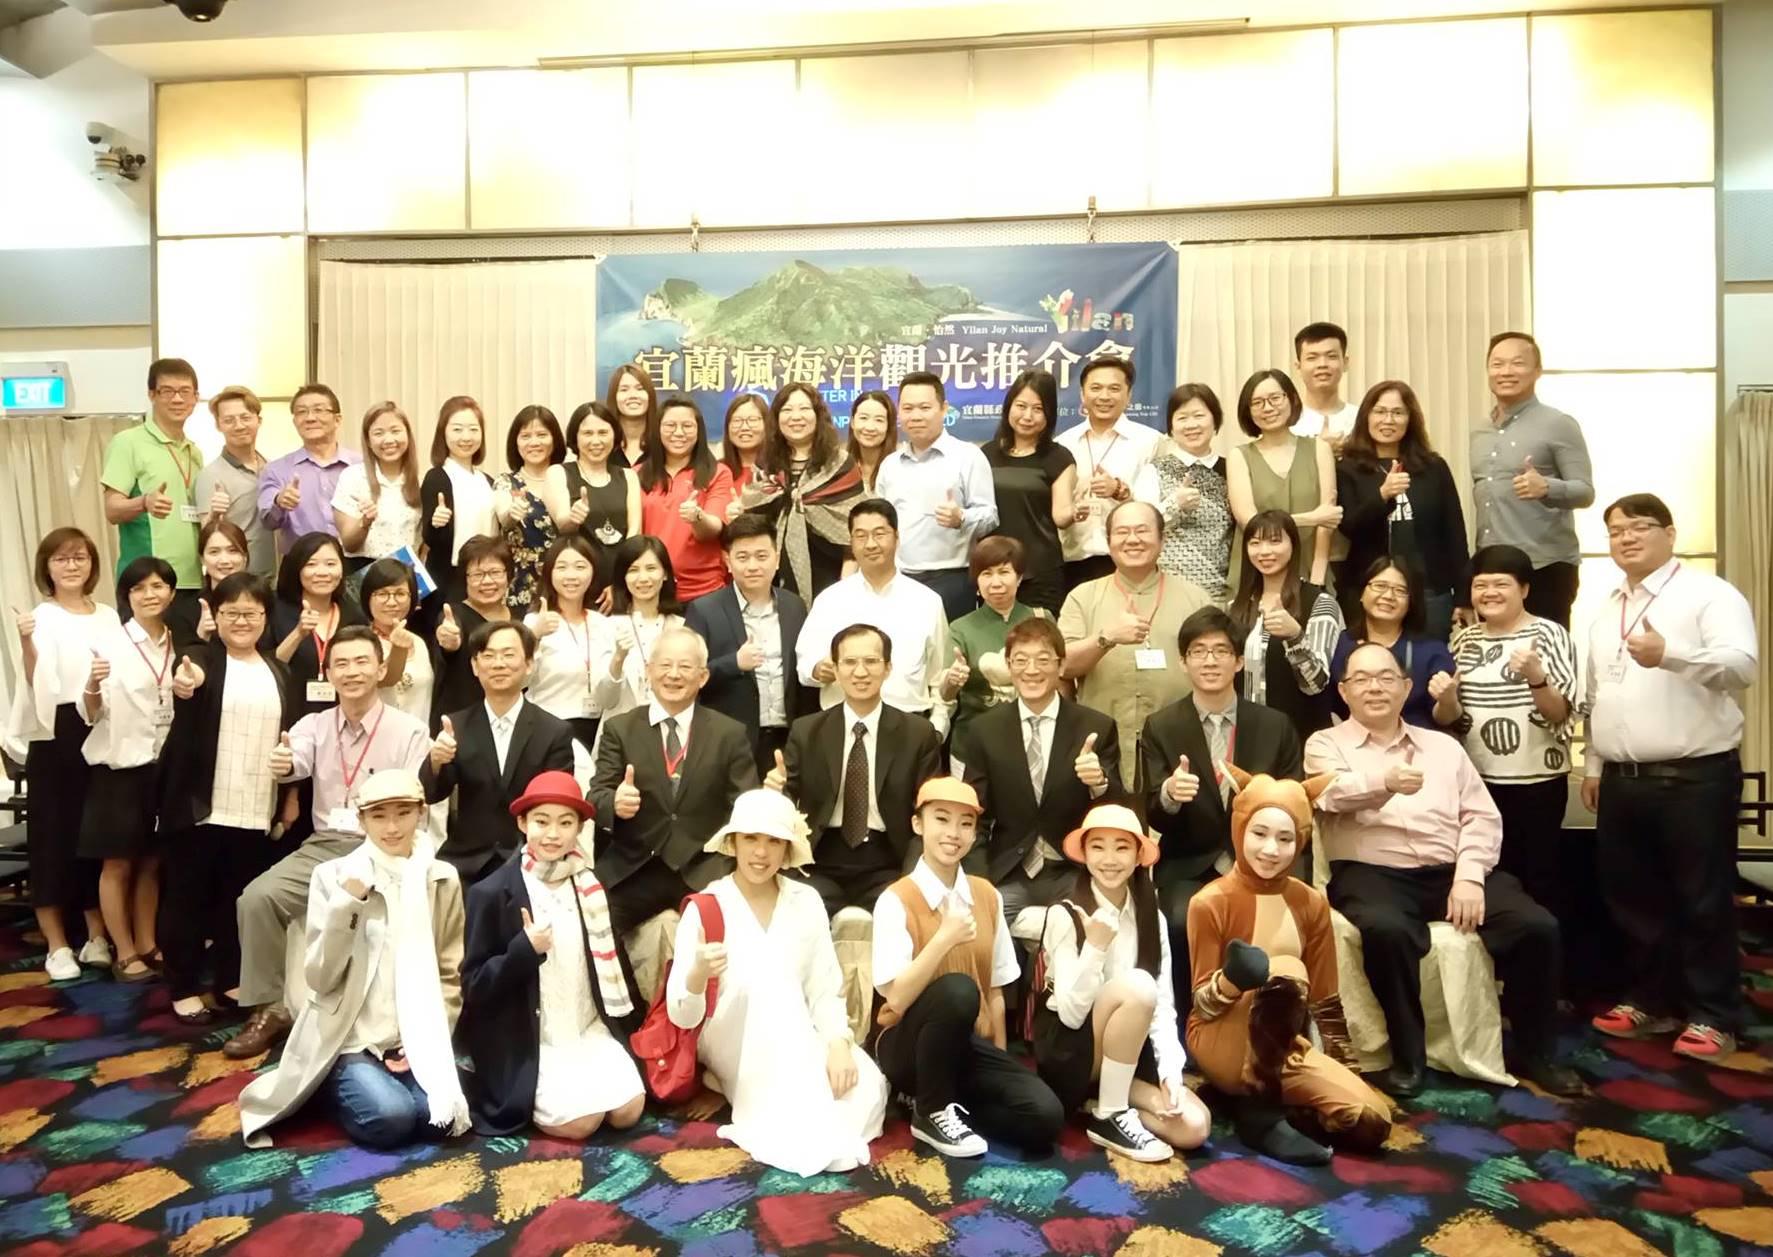 Deputy Representative Steven Tai (second row, center) with the delegates from Yilan County at the NATAS Travel Fair 2018. (21/03/2018)